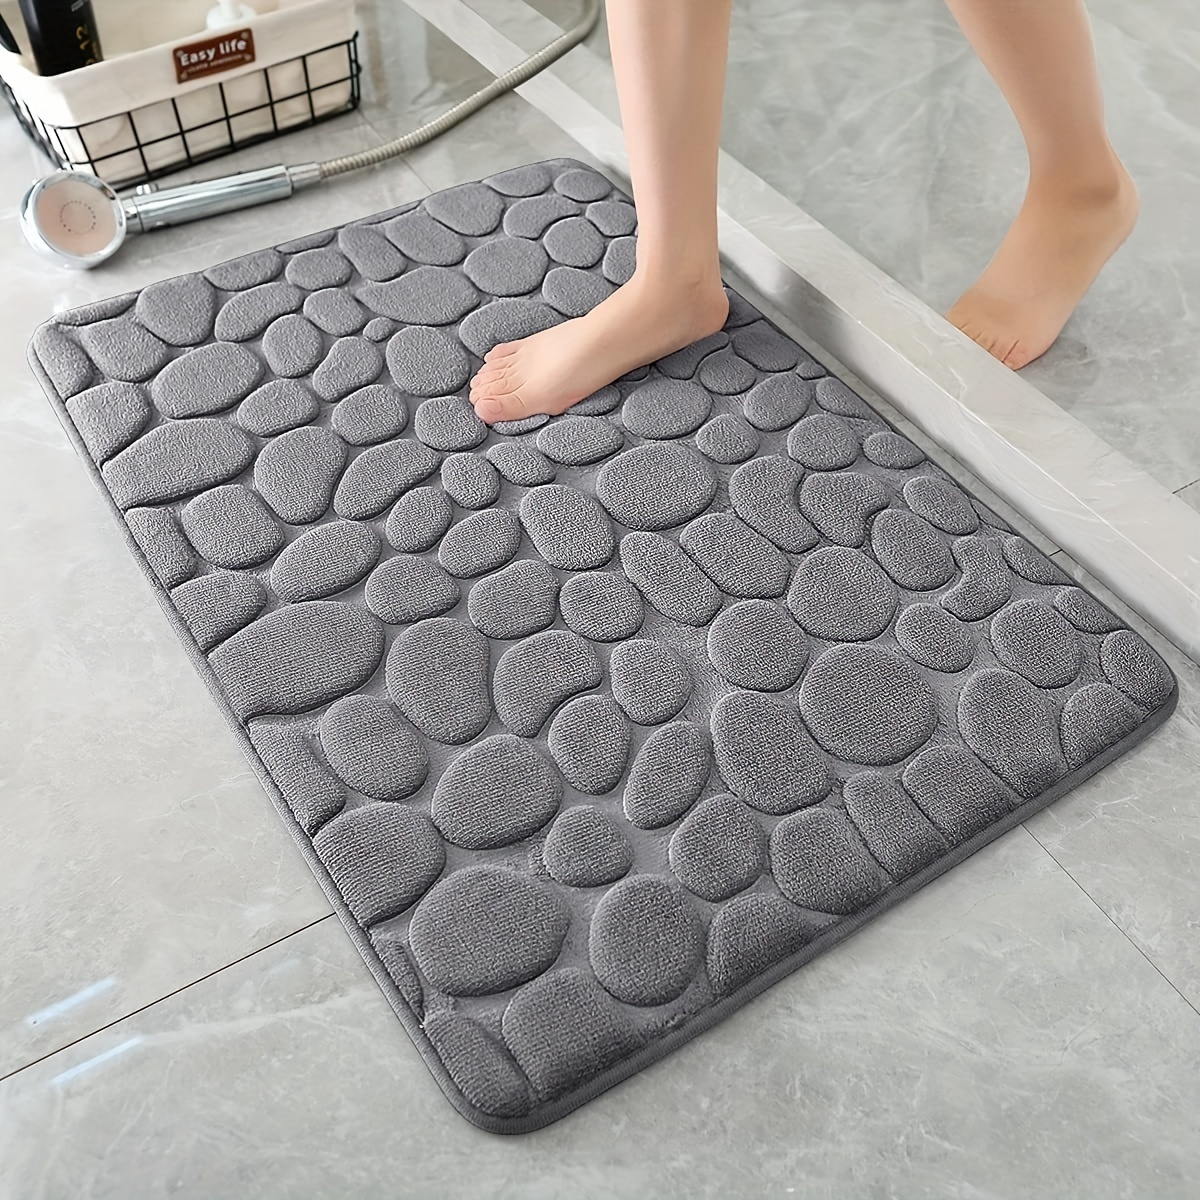 

Soft And Comfortable 1pc Memory Foam Bath Rug - Rapid Water Absorbent, Non-slip, And Washable For Your Shower Room!, Bathroom Decor